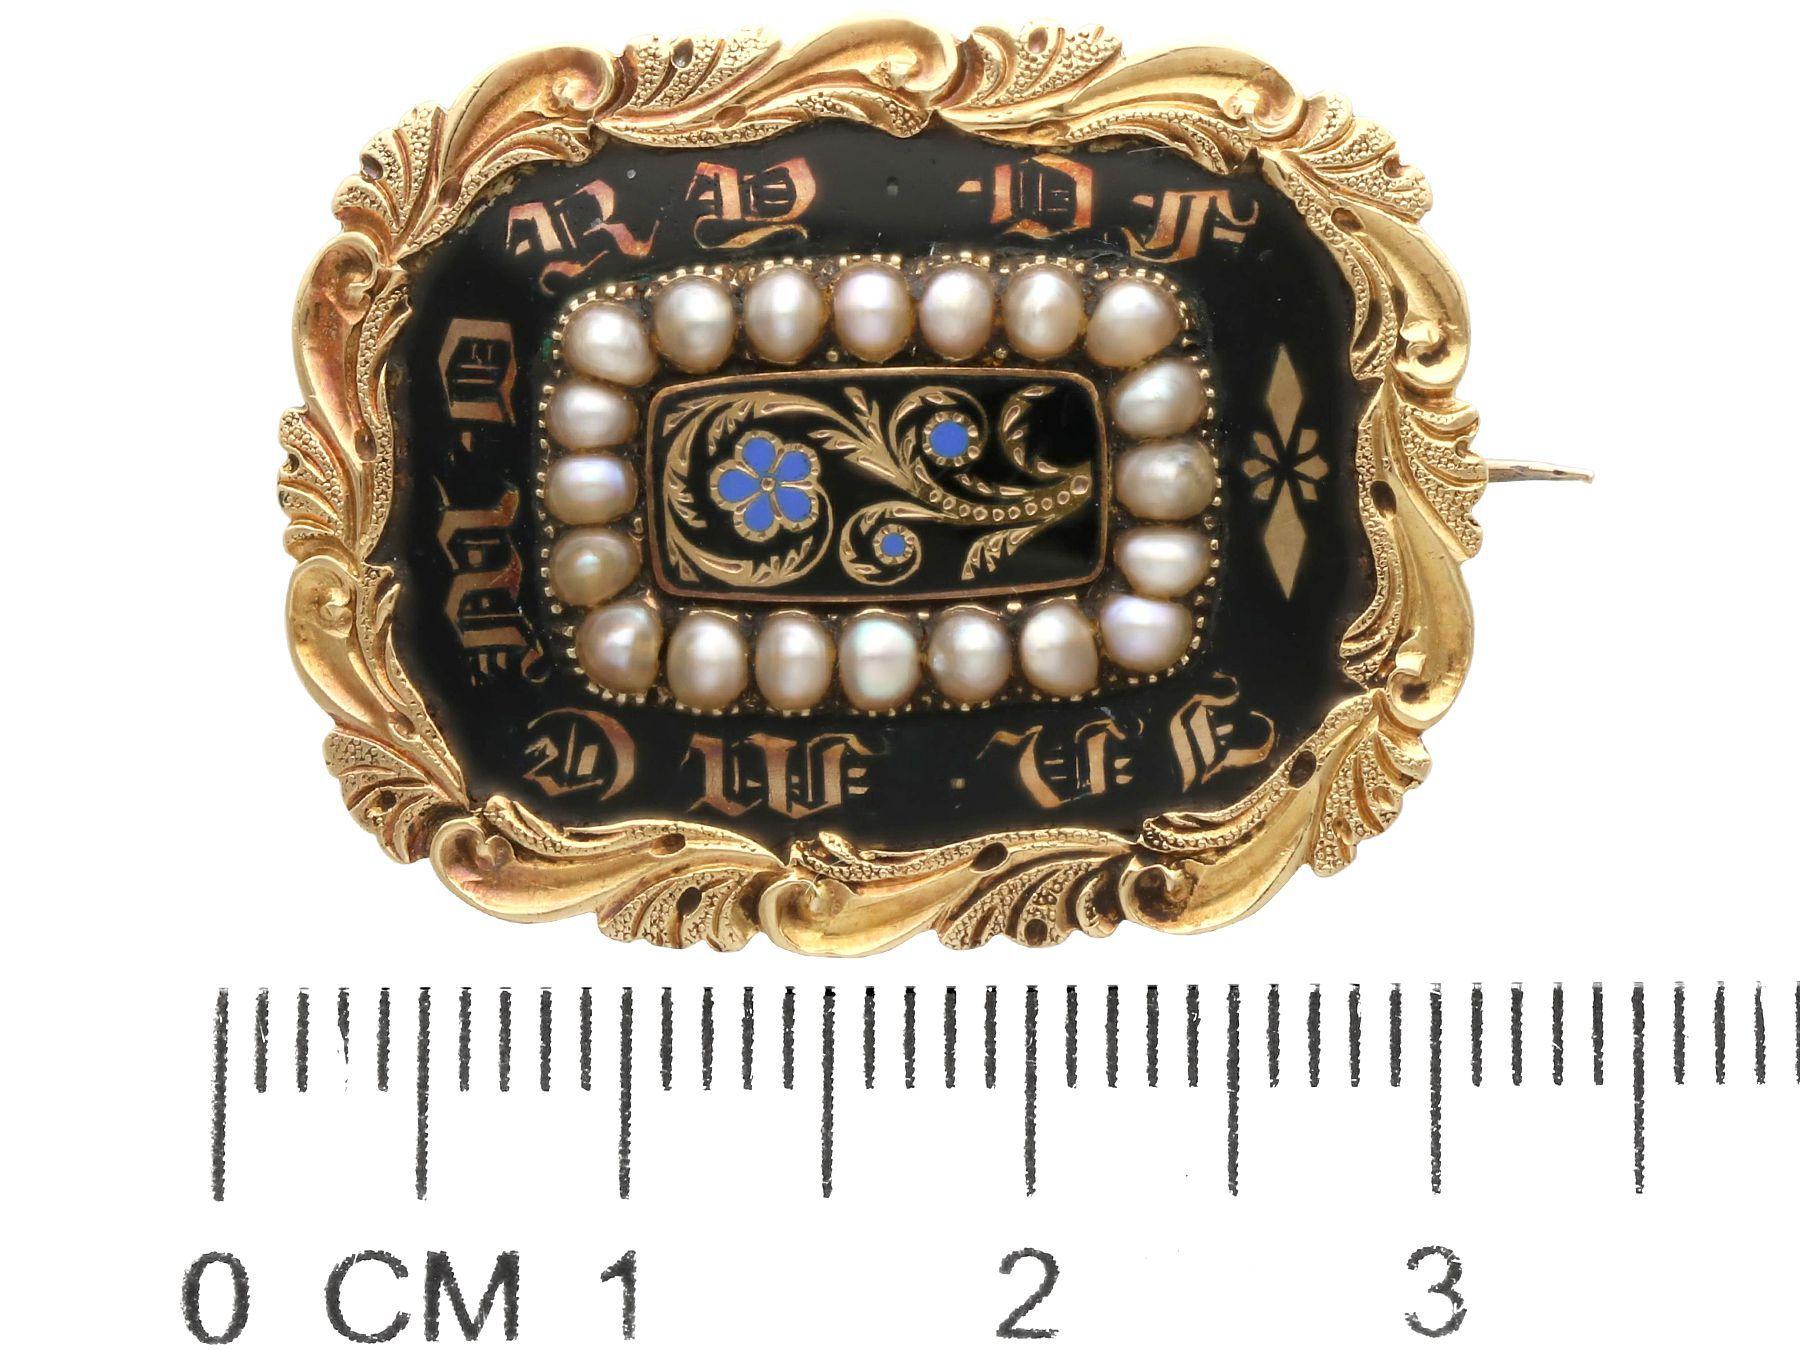 Antique Enamel and Seed Pearl 12k Yellow Gold Mourning Brooch, circa 1835 In Excellent Condition For Sale In Jesmond, Newcastle Upon Tyne